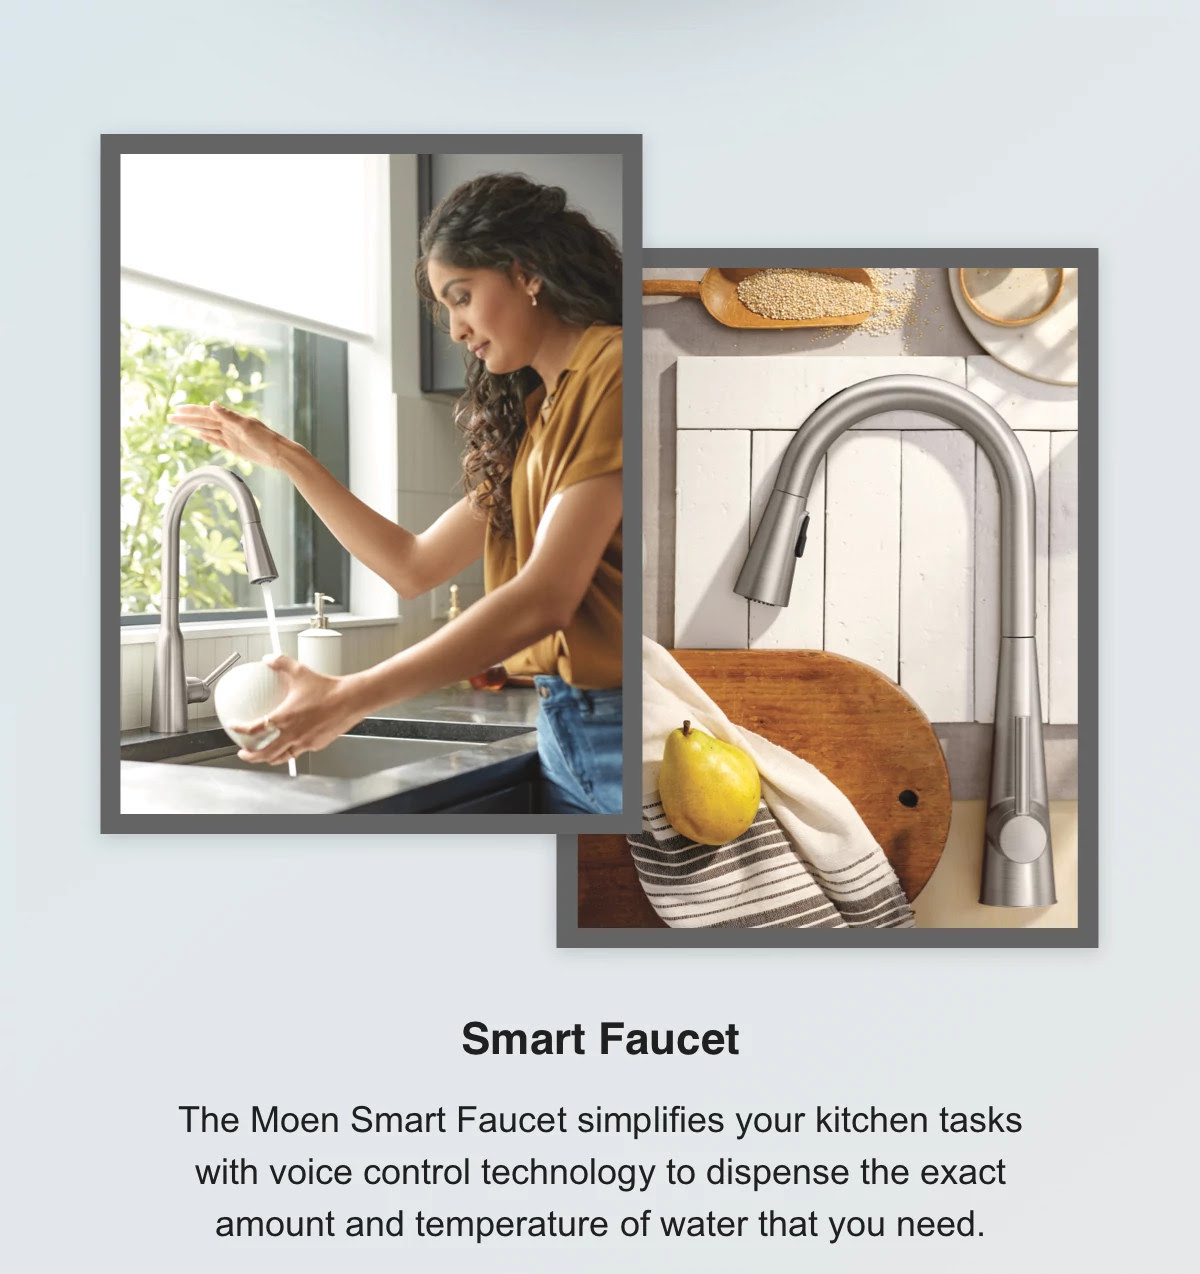 Smart Faucet - The Moen Smart Faucet simplifies your kitchen tasks with voice control technology to dispense the exact amount and temperature of water that you need.